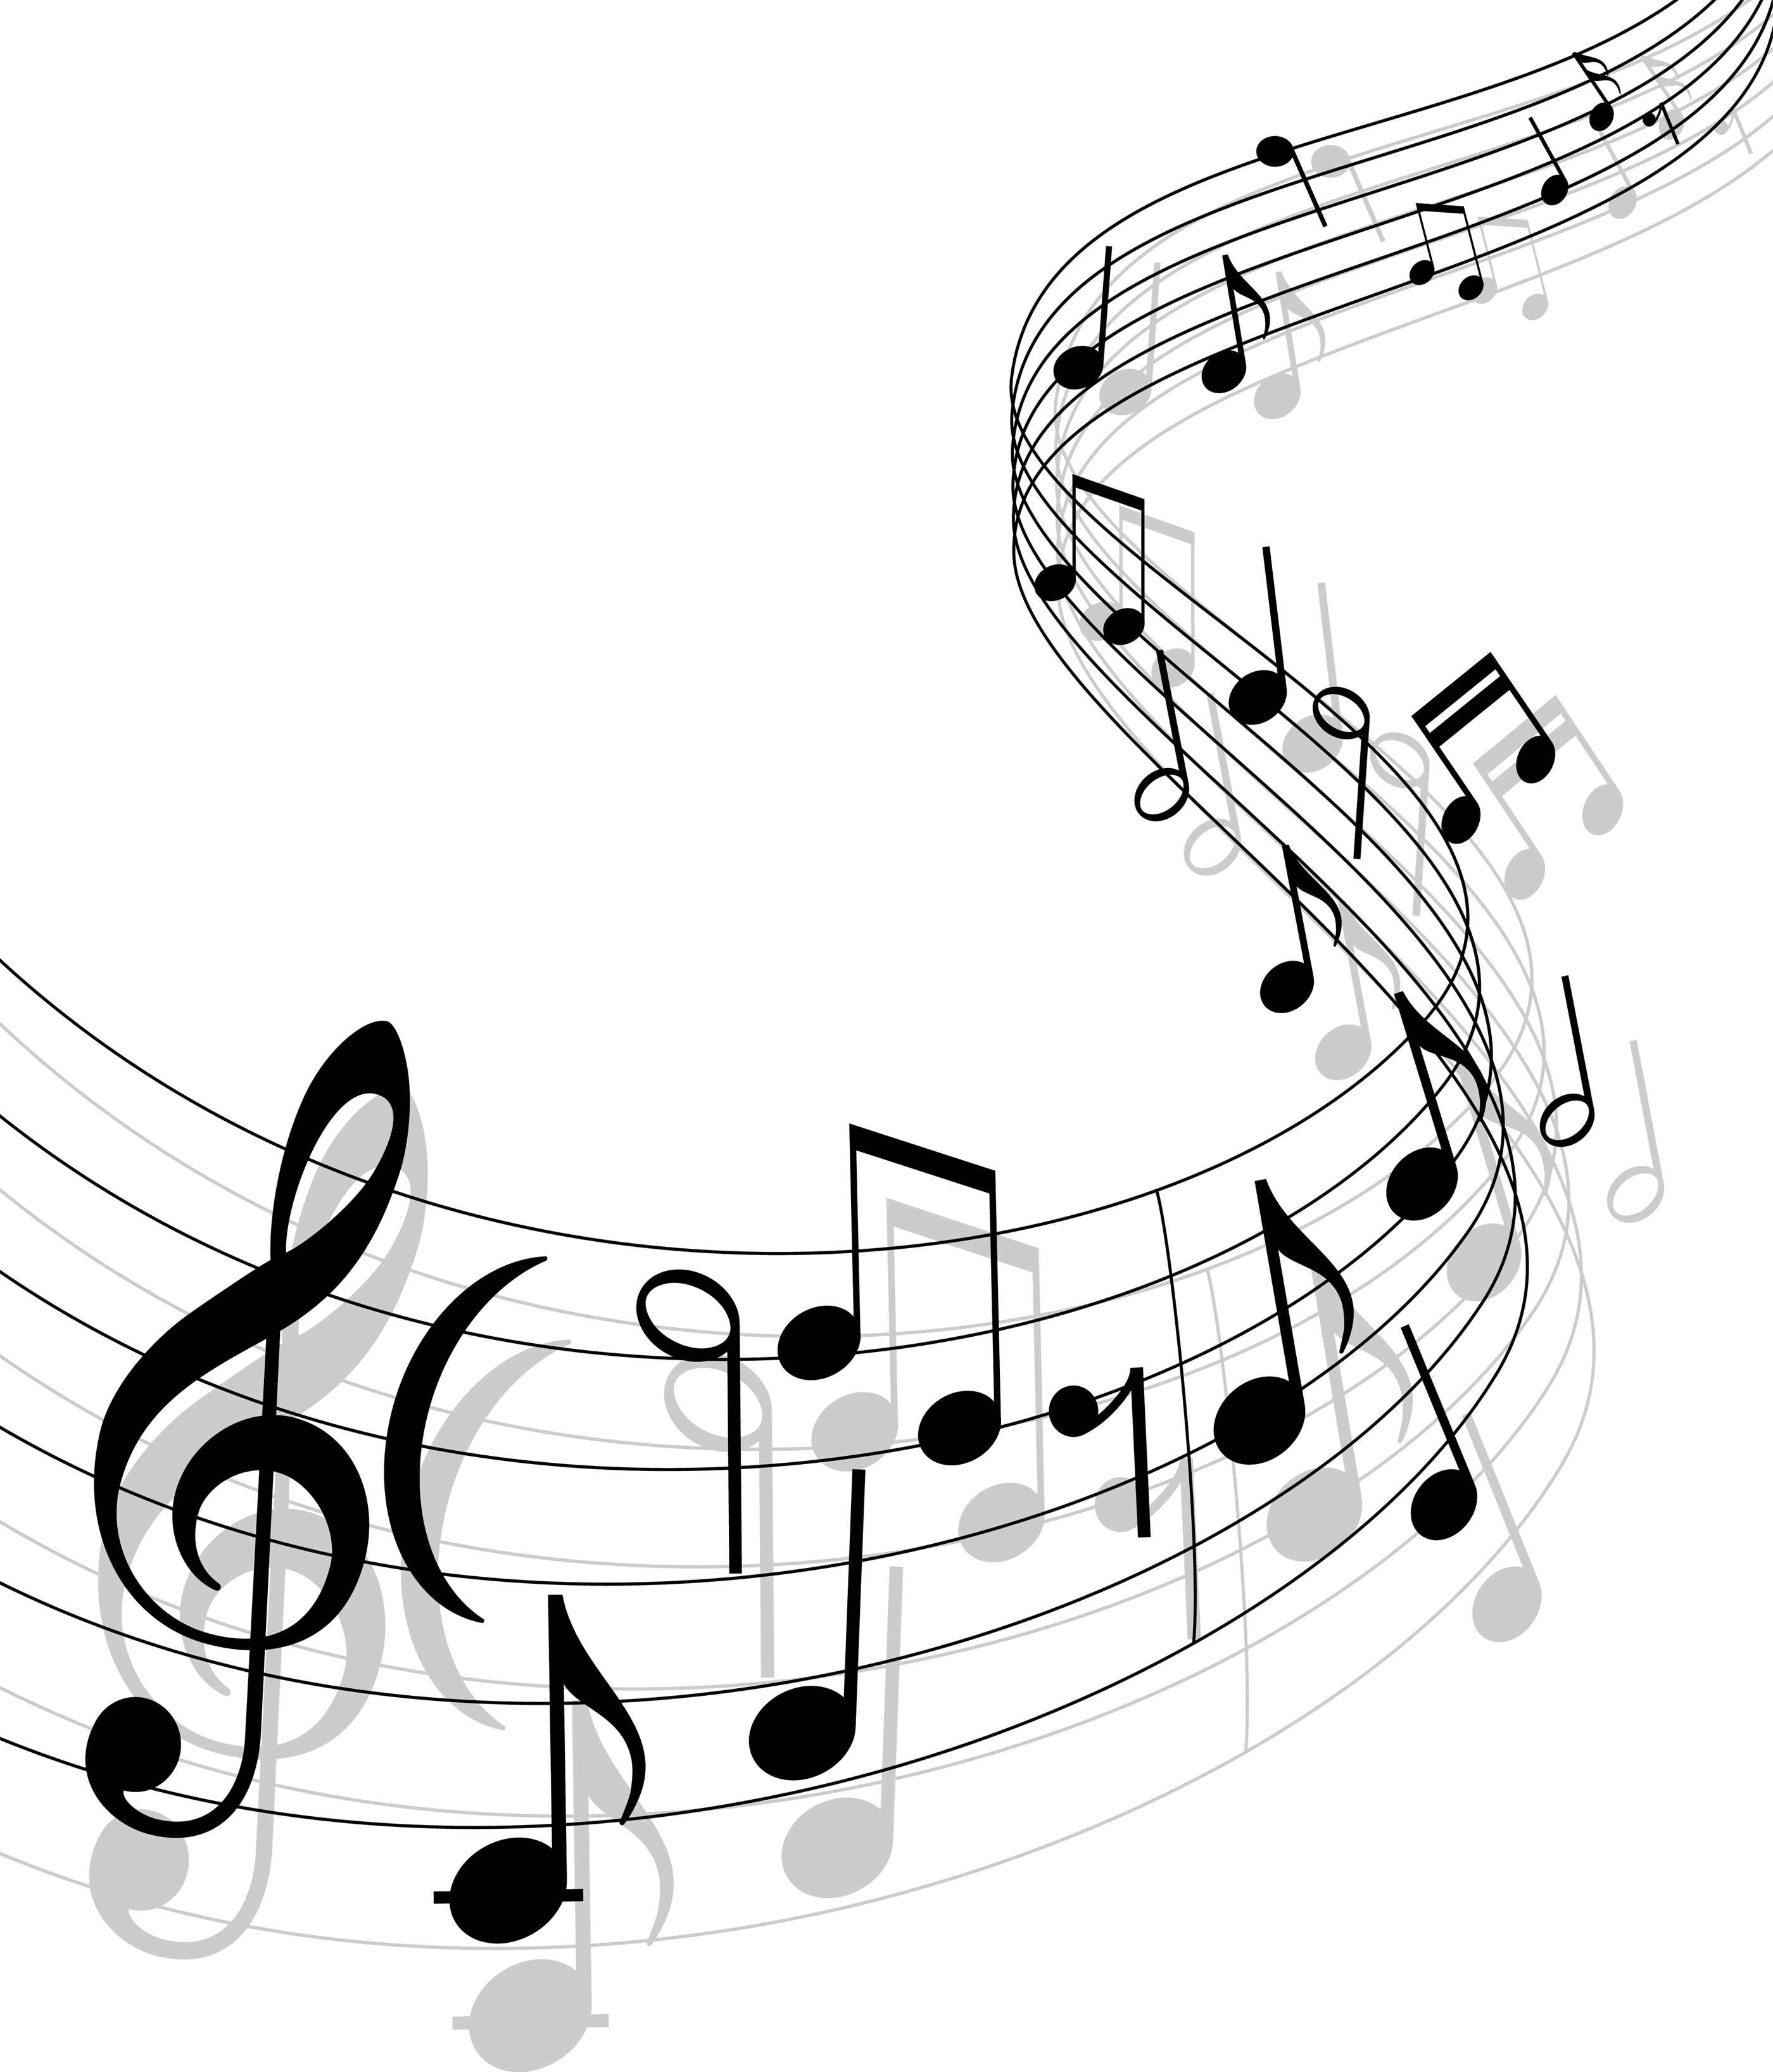 music-note-musical-notes-music-musical-note-clipart-free-vector-for-wikiclipart